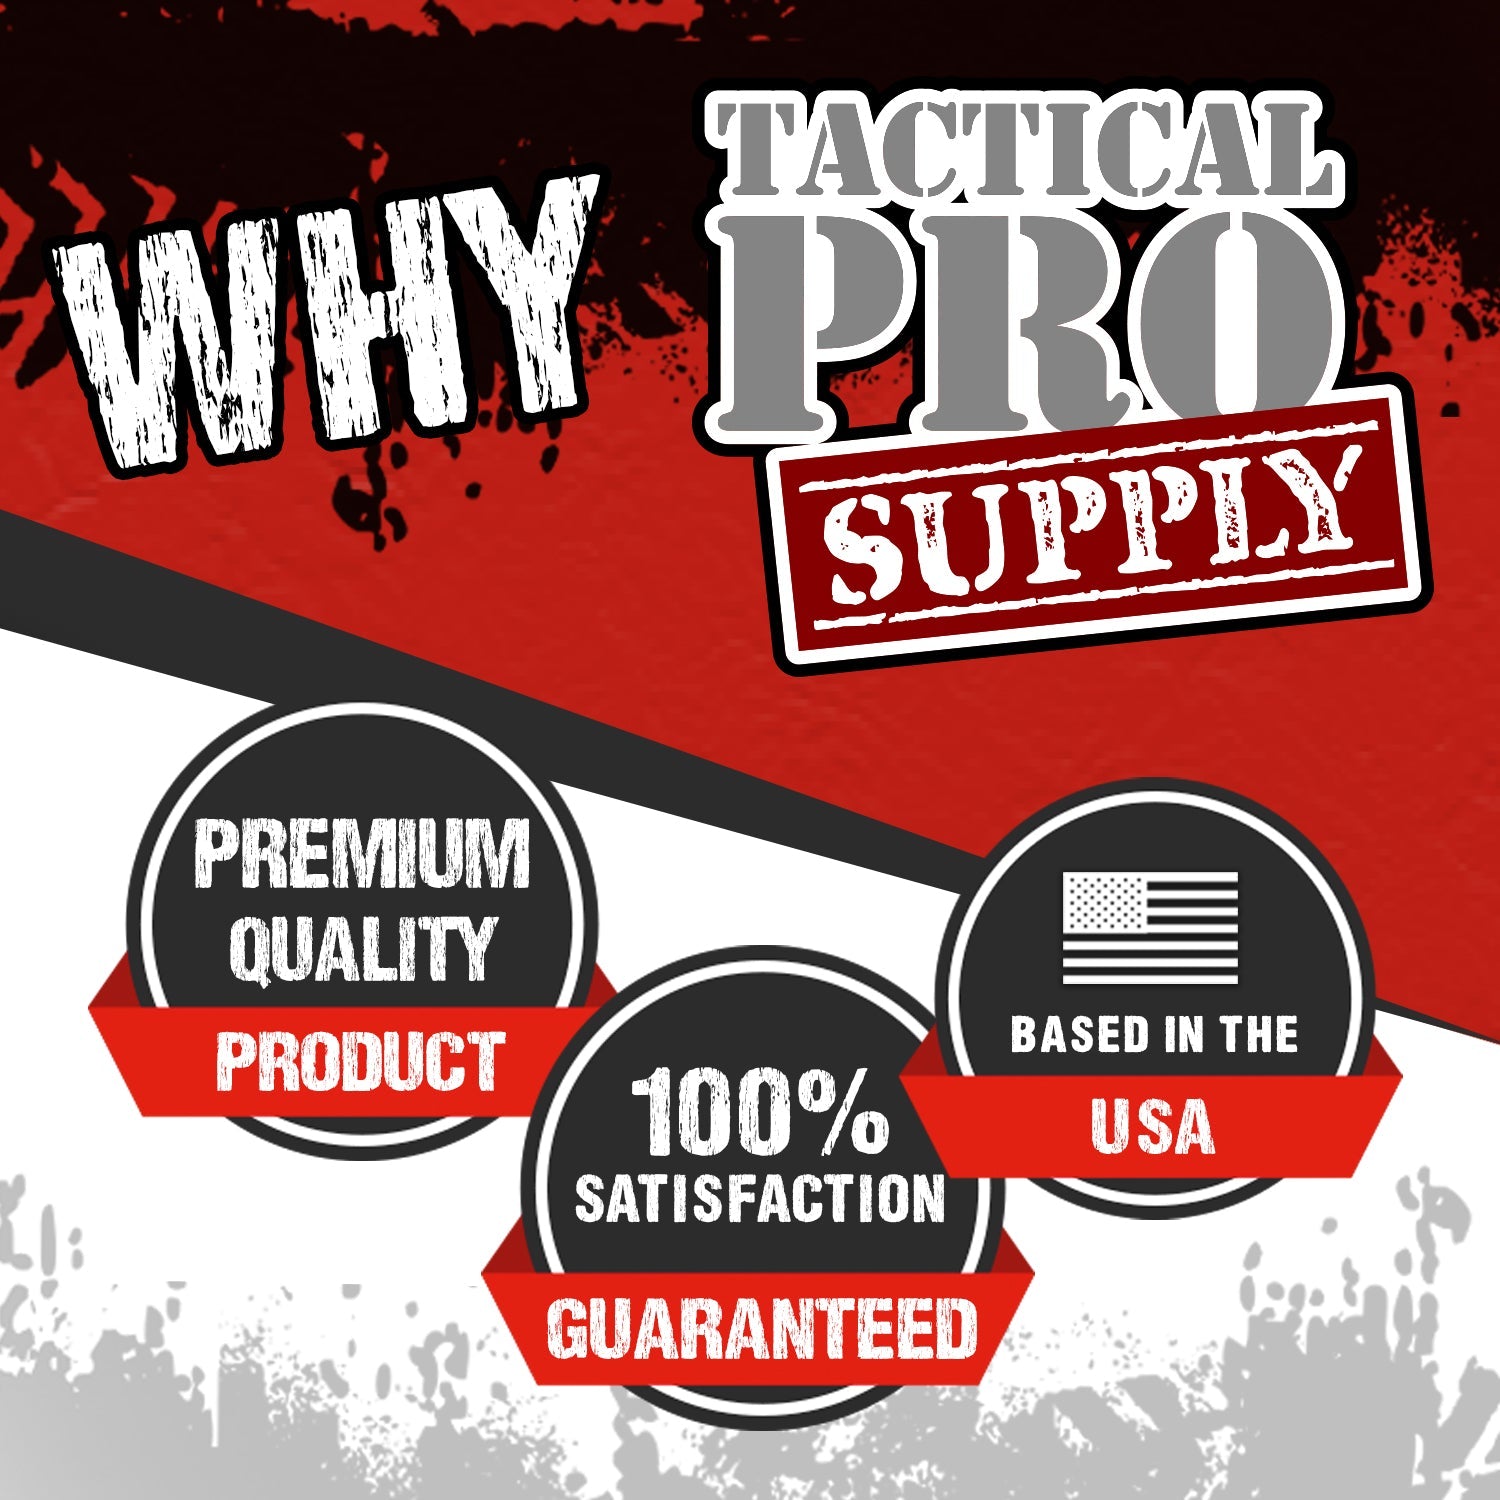 Home of the Brave - Tactical Pro Supply, LLC